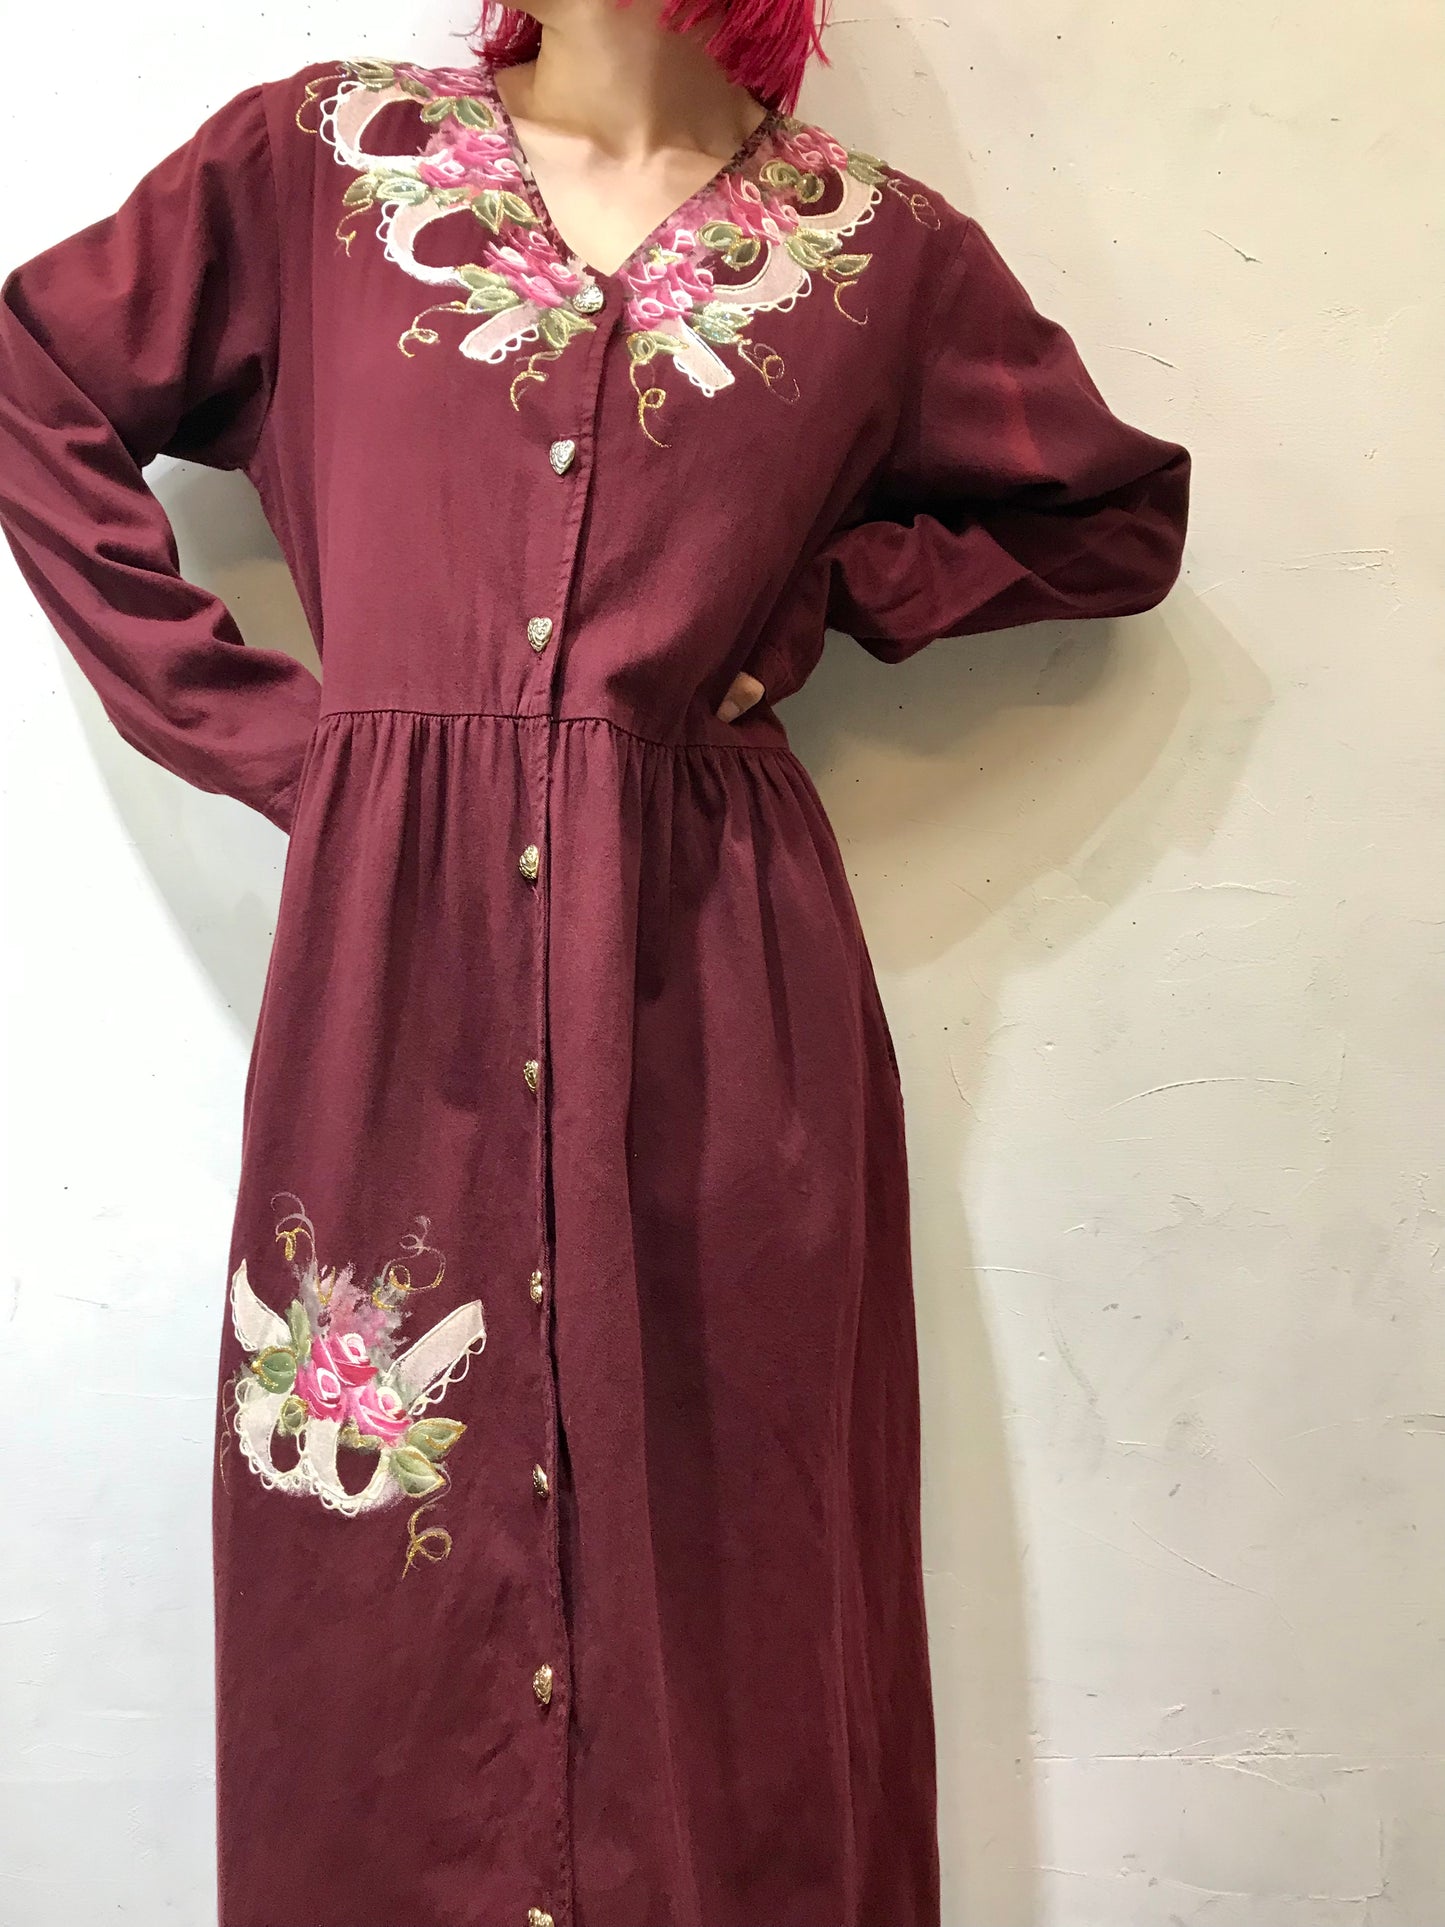 Vintage Hand Painted Dress MADE IN USA [J25157]